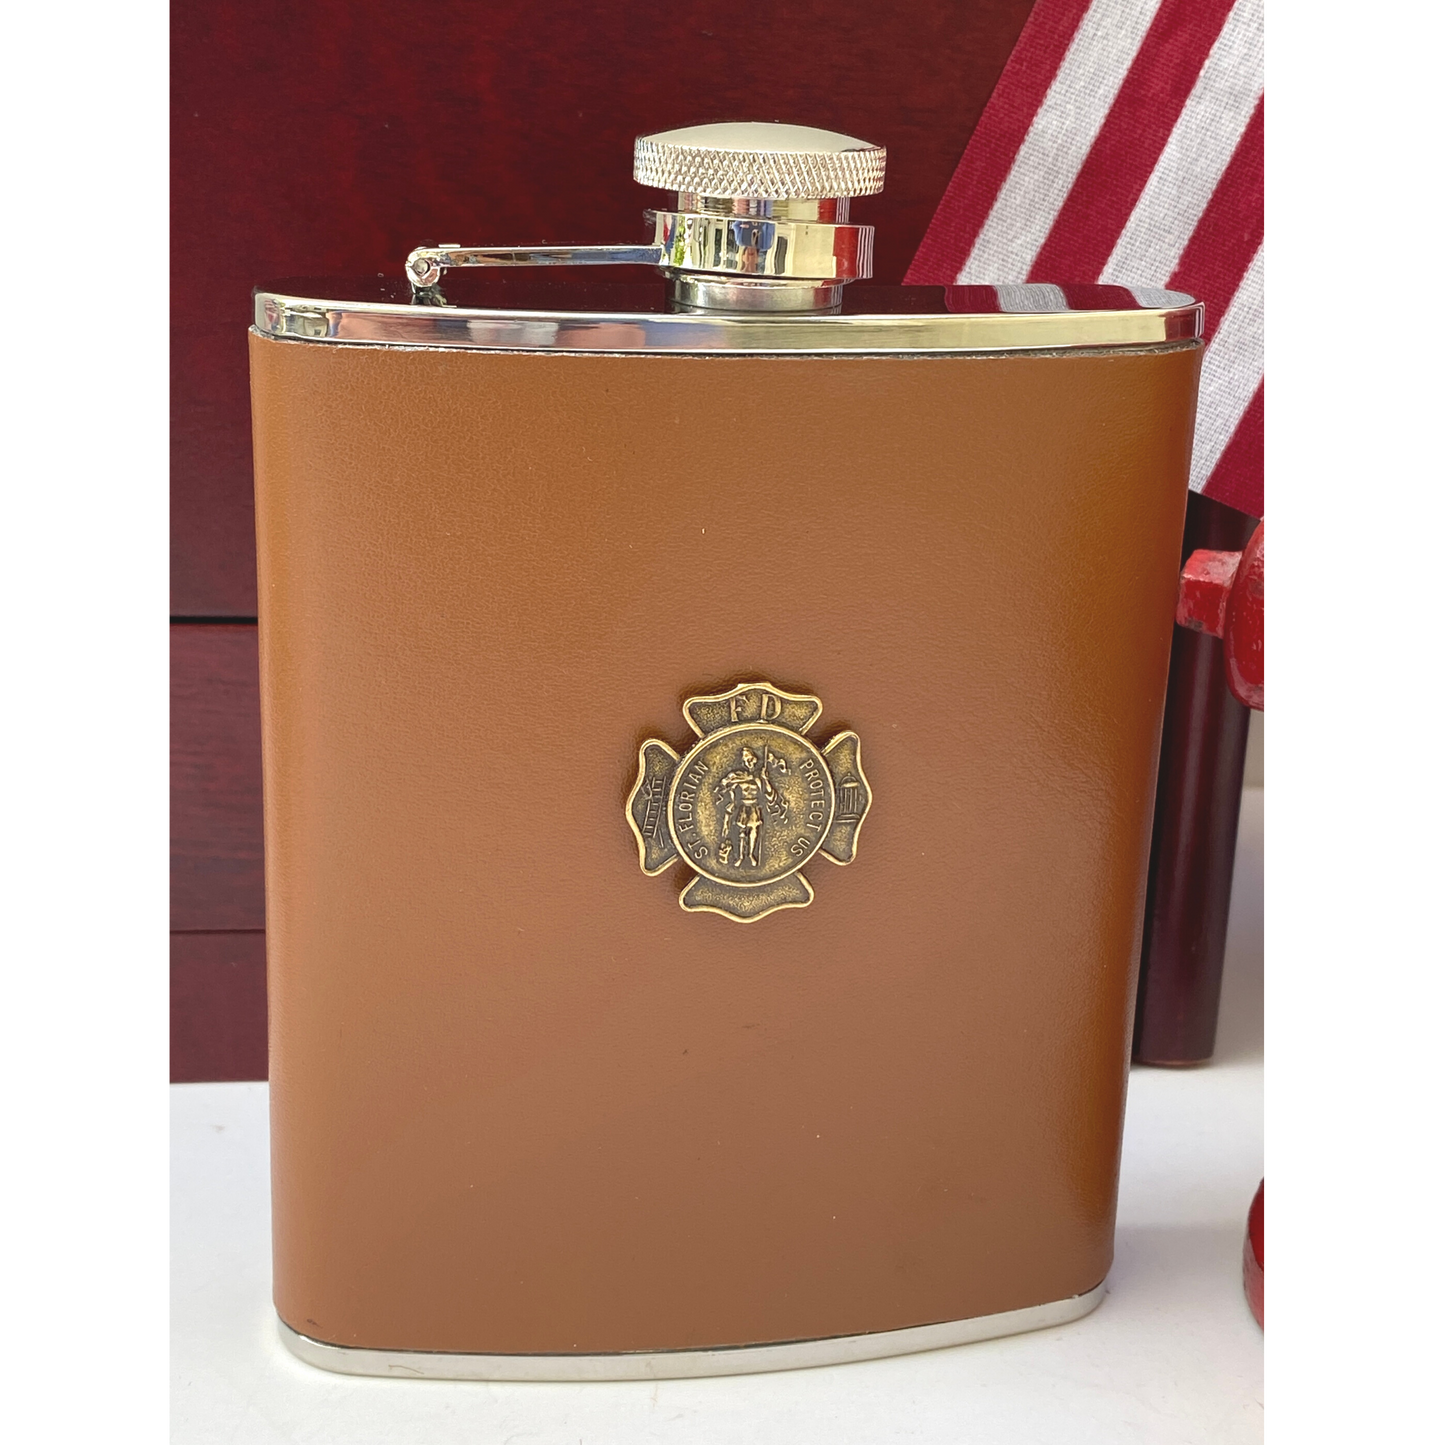 Shop Now for Firefighter Gift,  Leather Flask, Saint Florian Medallion